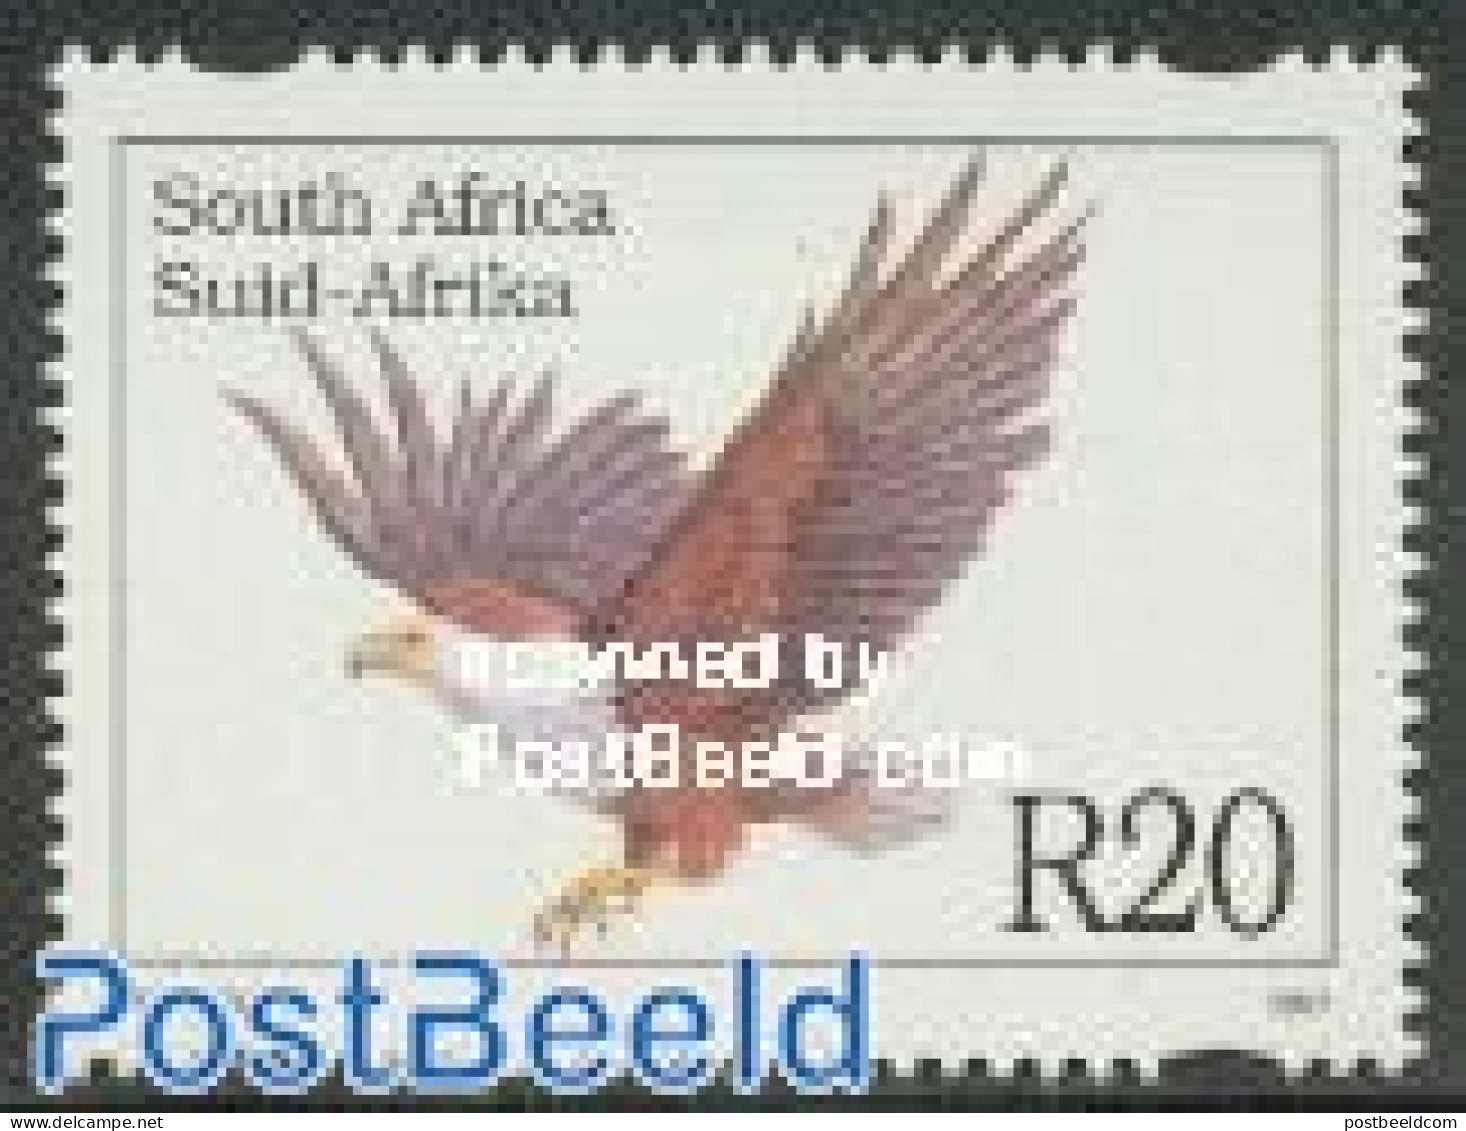 South Africa 1997 Fish Eagle 1v, Mint NH, Nature - Birds - Birds Of Prey - Unused Stamps